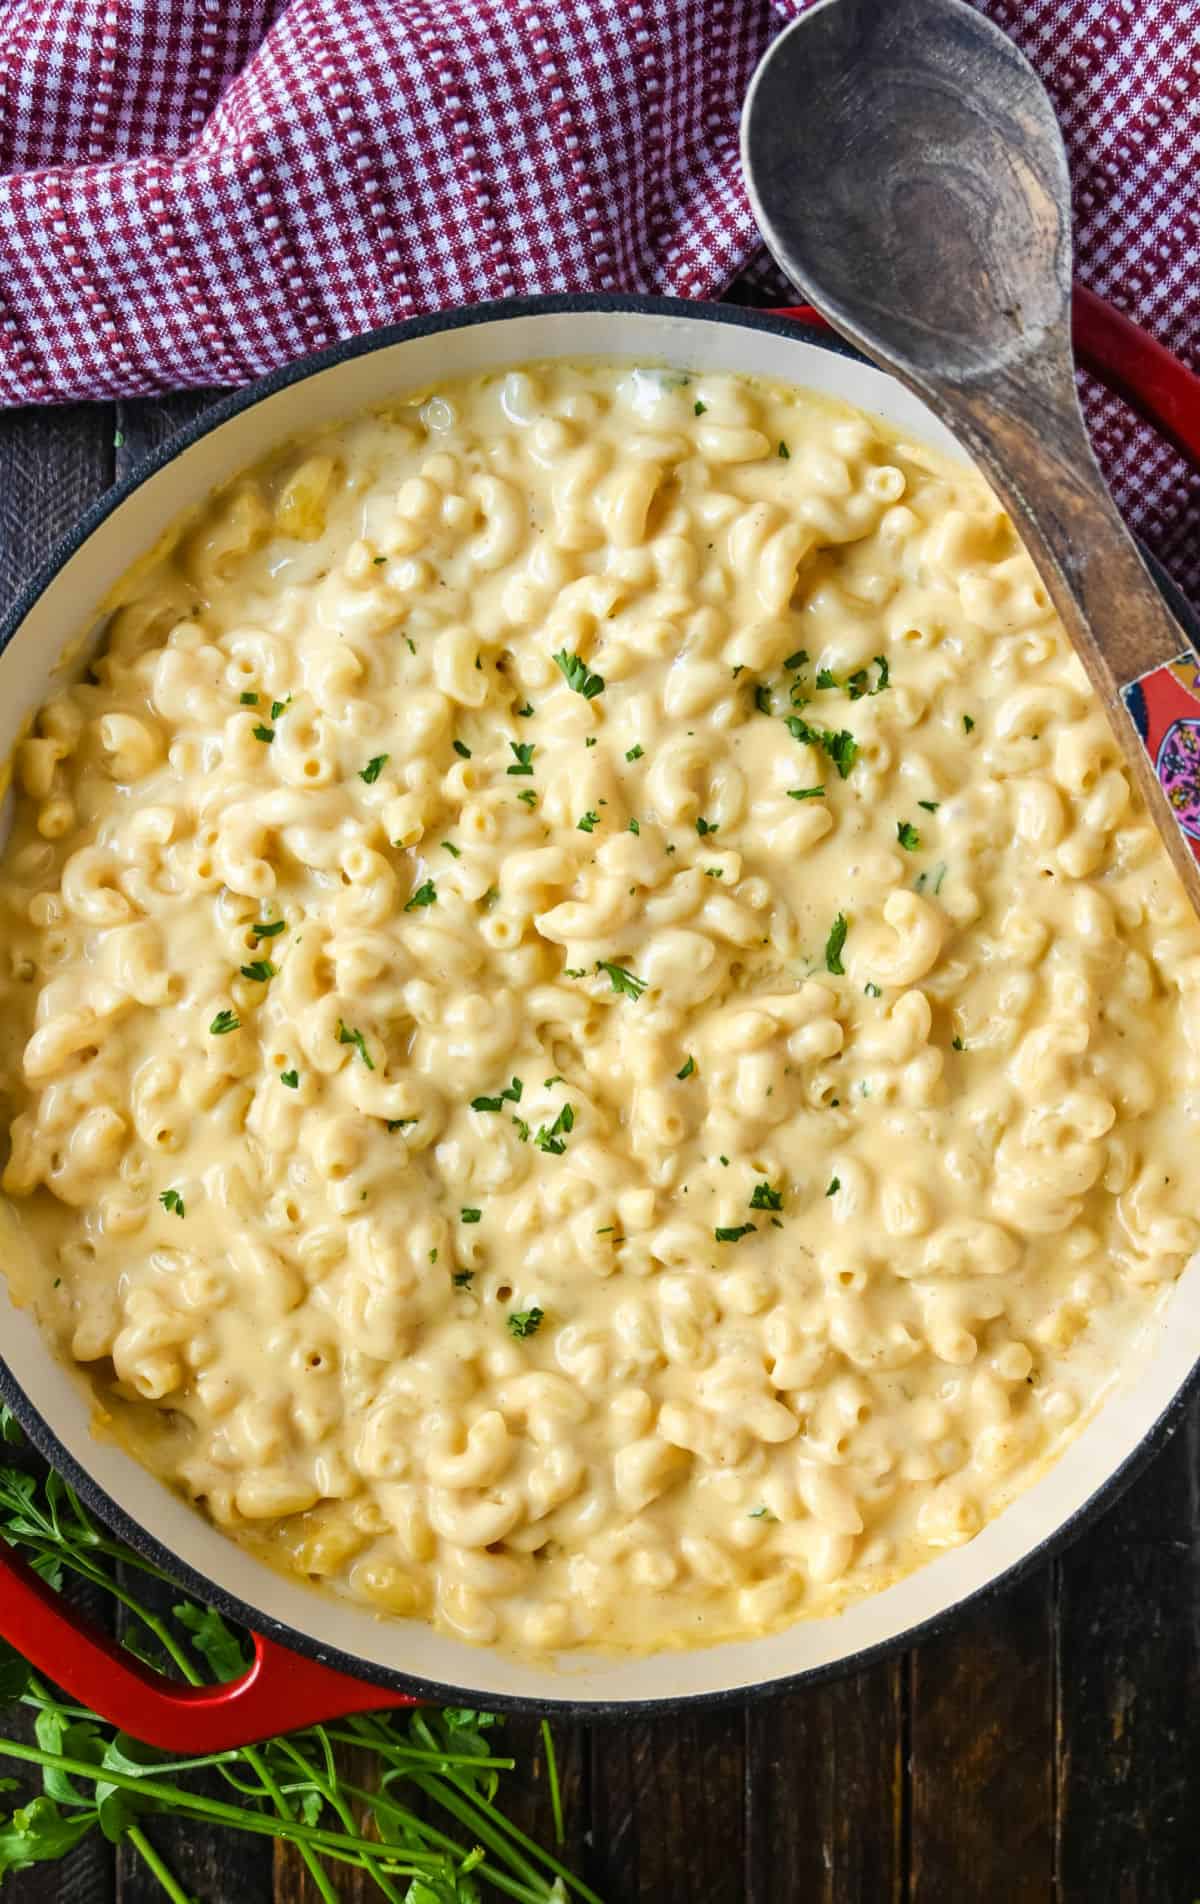 Stovetop macaroni and cheese in a red cast iron skillet.